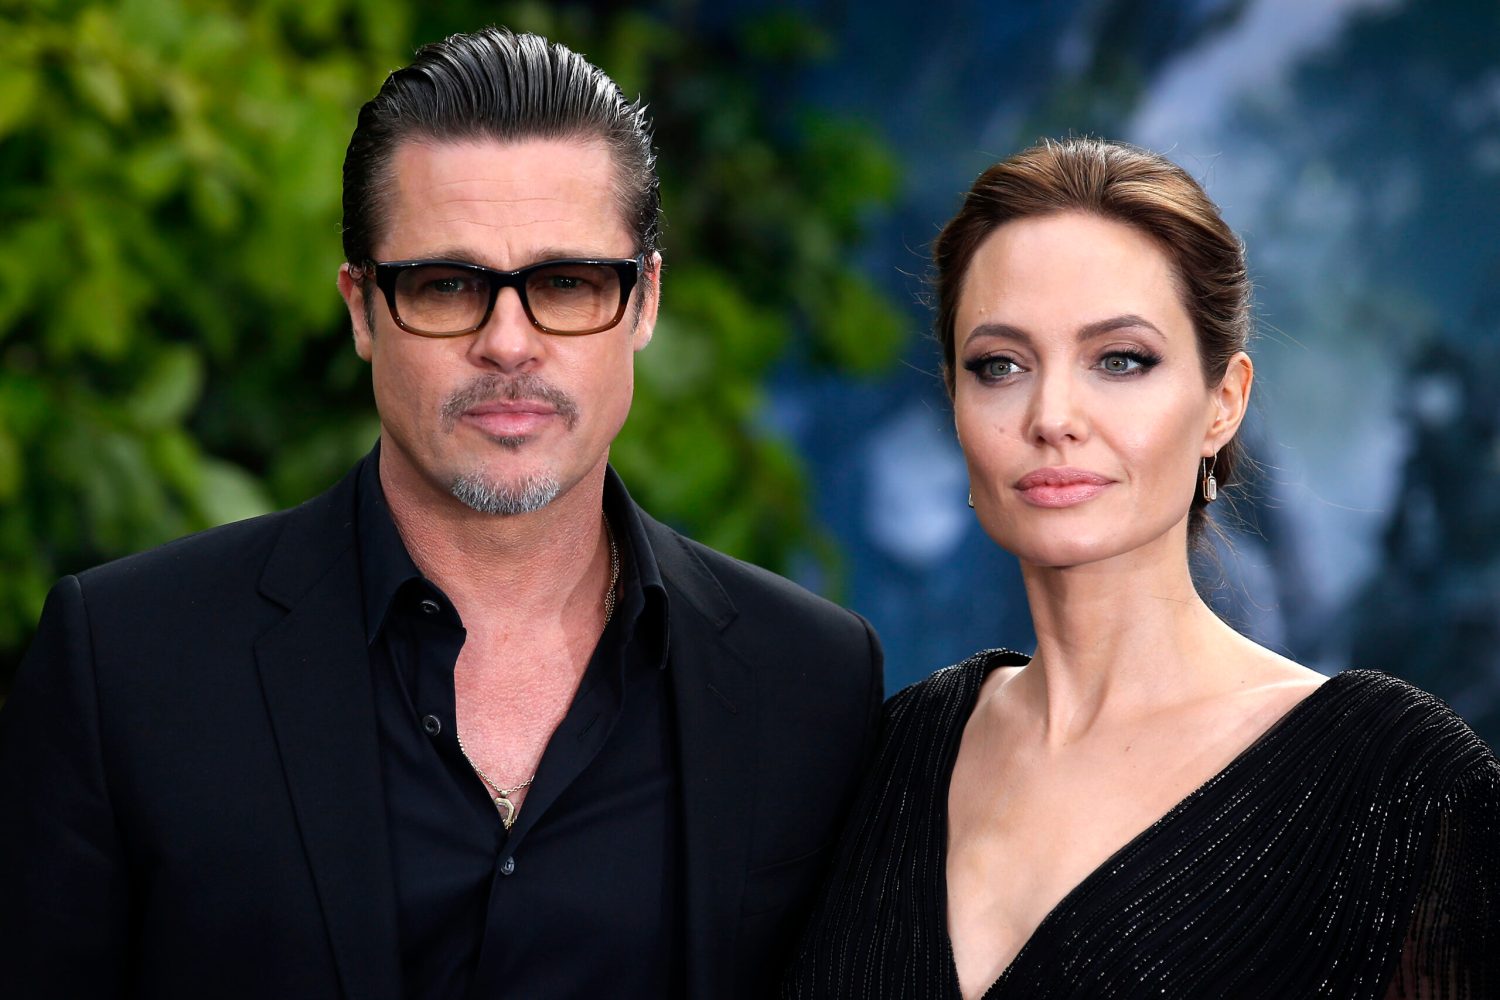 Angelina Jolie Filed A Lawsuit Claiming That Brad Pitt Physically Assaulted Her On A Private Jet